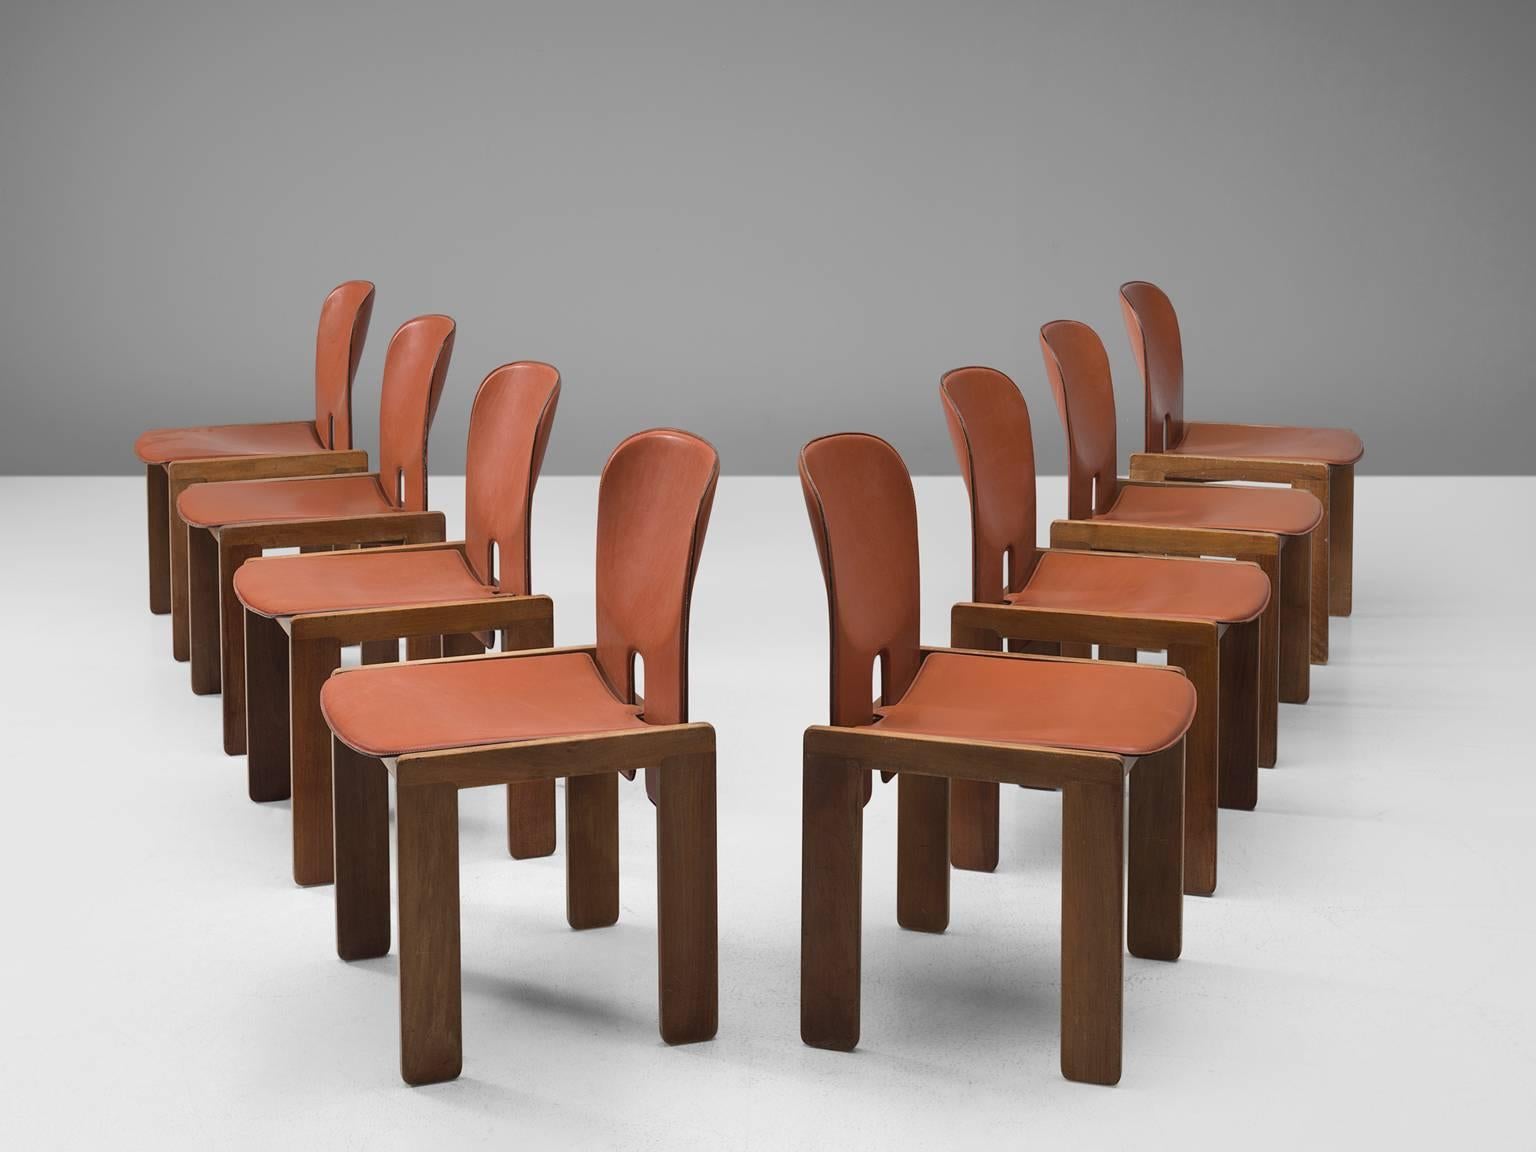 Set of eight chairs model 121, in walnut and cognac leather, by Afra & Tobia Scarpa for Cassina, Italy, 1965.
 
Set of eight chairs by Italian designer couple Tobia & Afra Scarpa. These chairs have a cubic and architectural appearance. The base